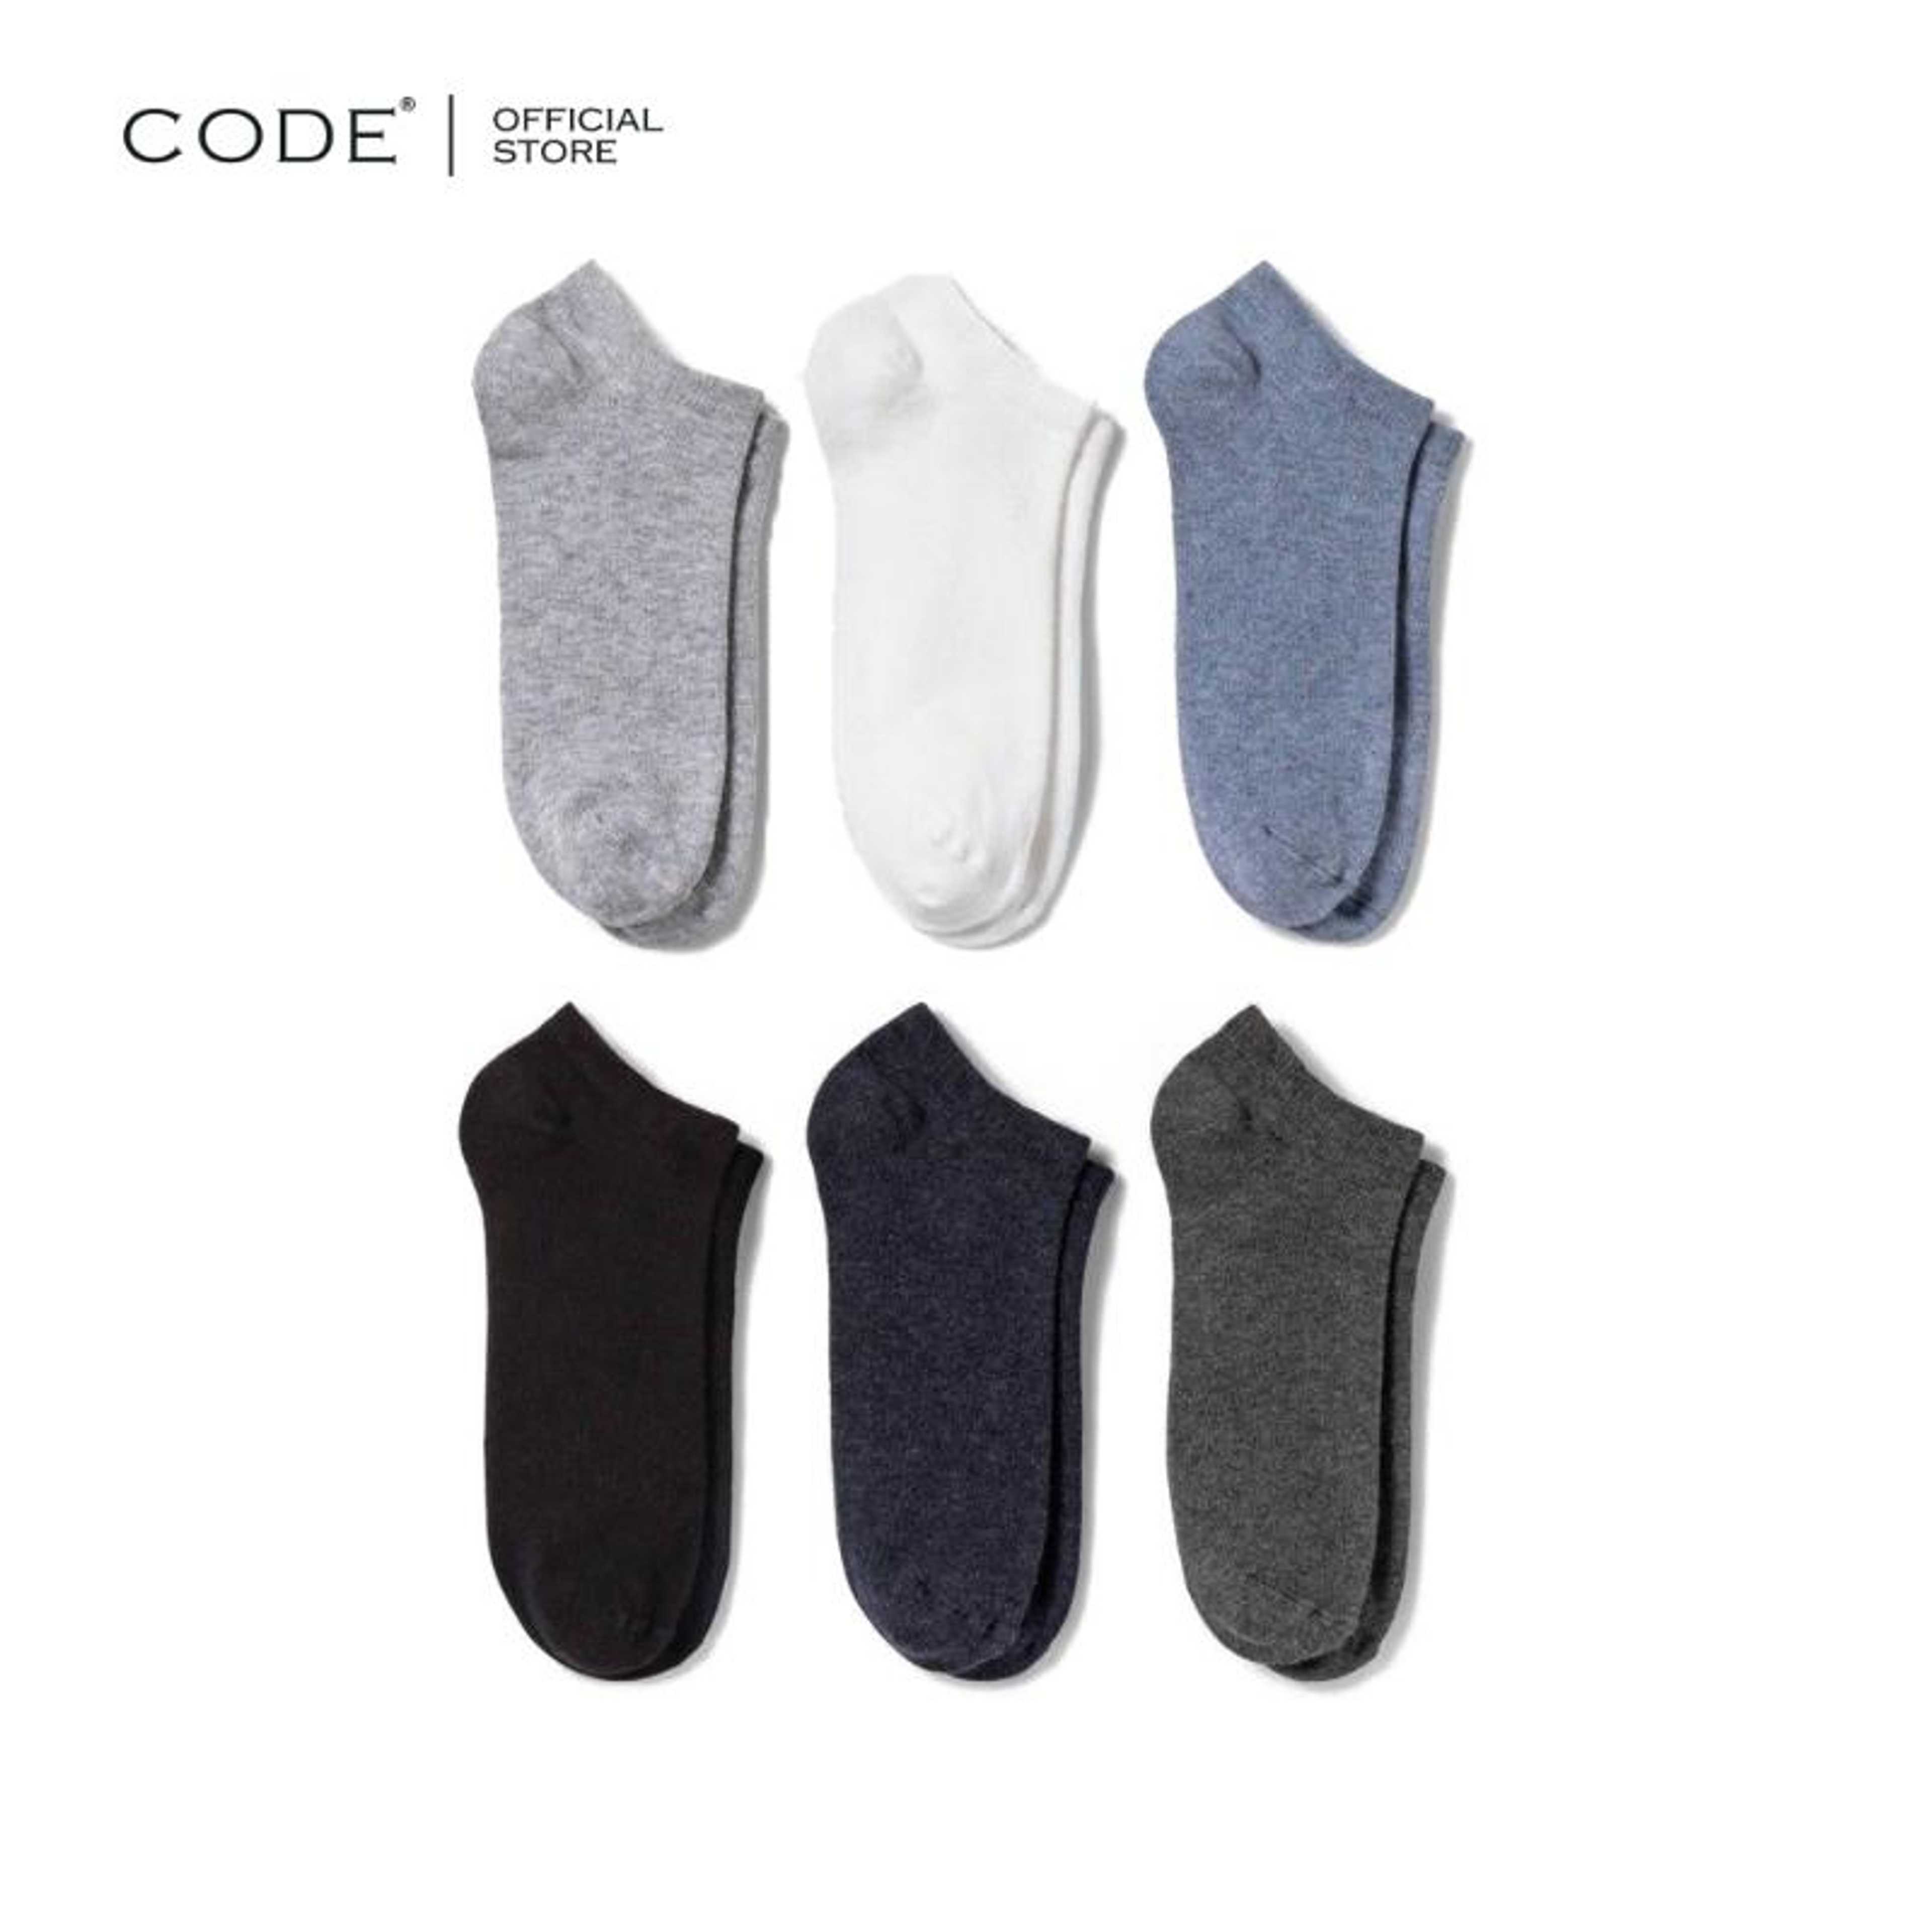 Code 6 Pairs Cotton Ankle Socks For Women  Cotton Ankle Socks For Men  No Show Low Cut Socks For Women  Business Casual Socks For Women - 3 Random colors